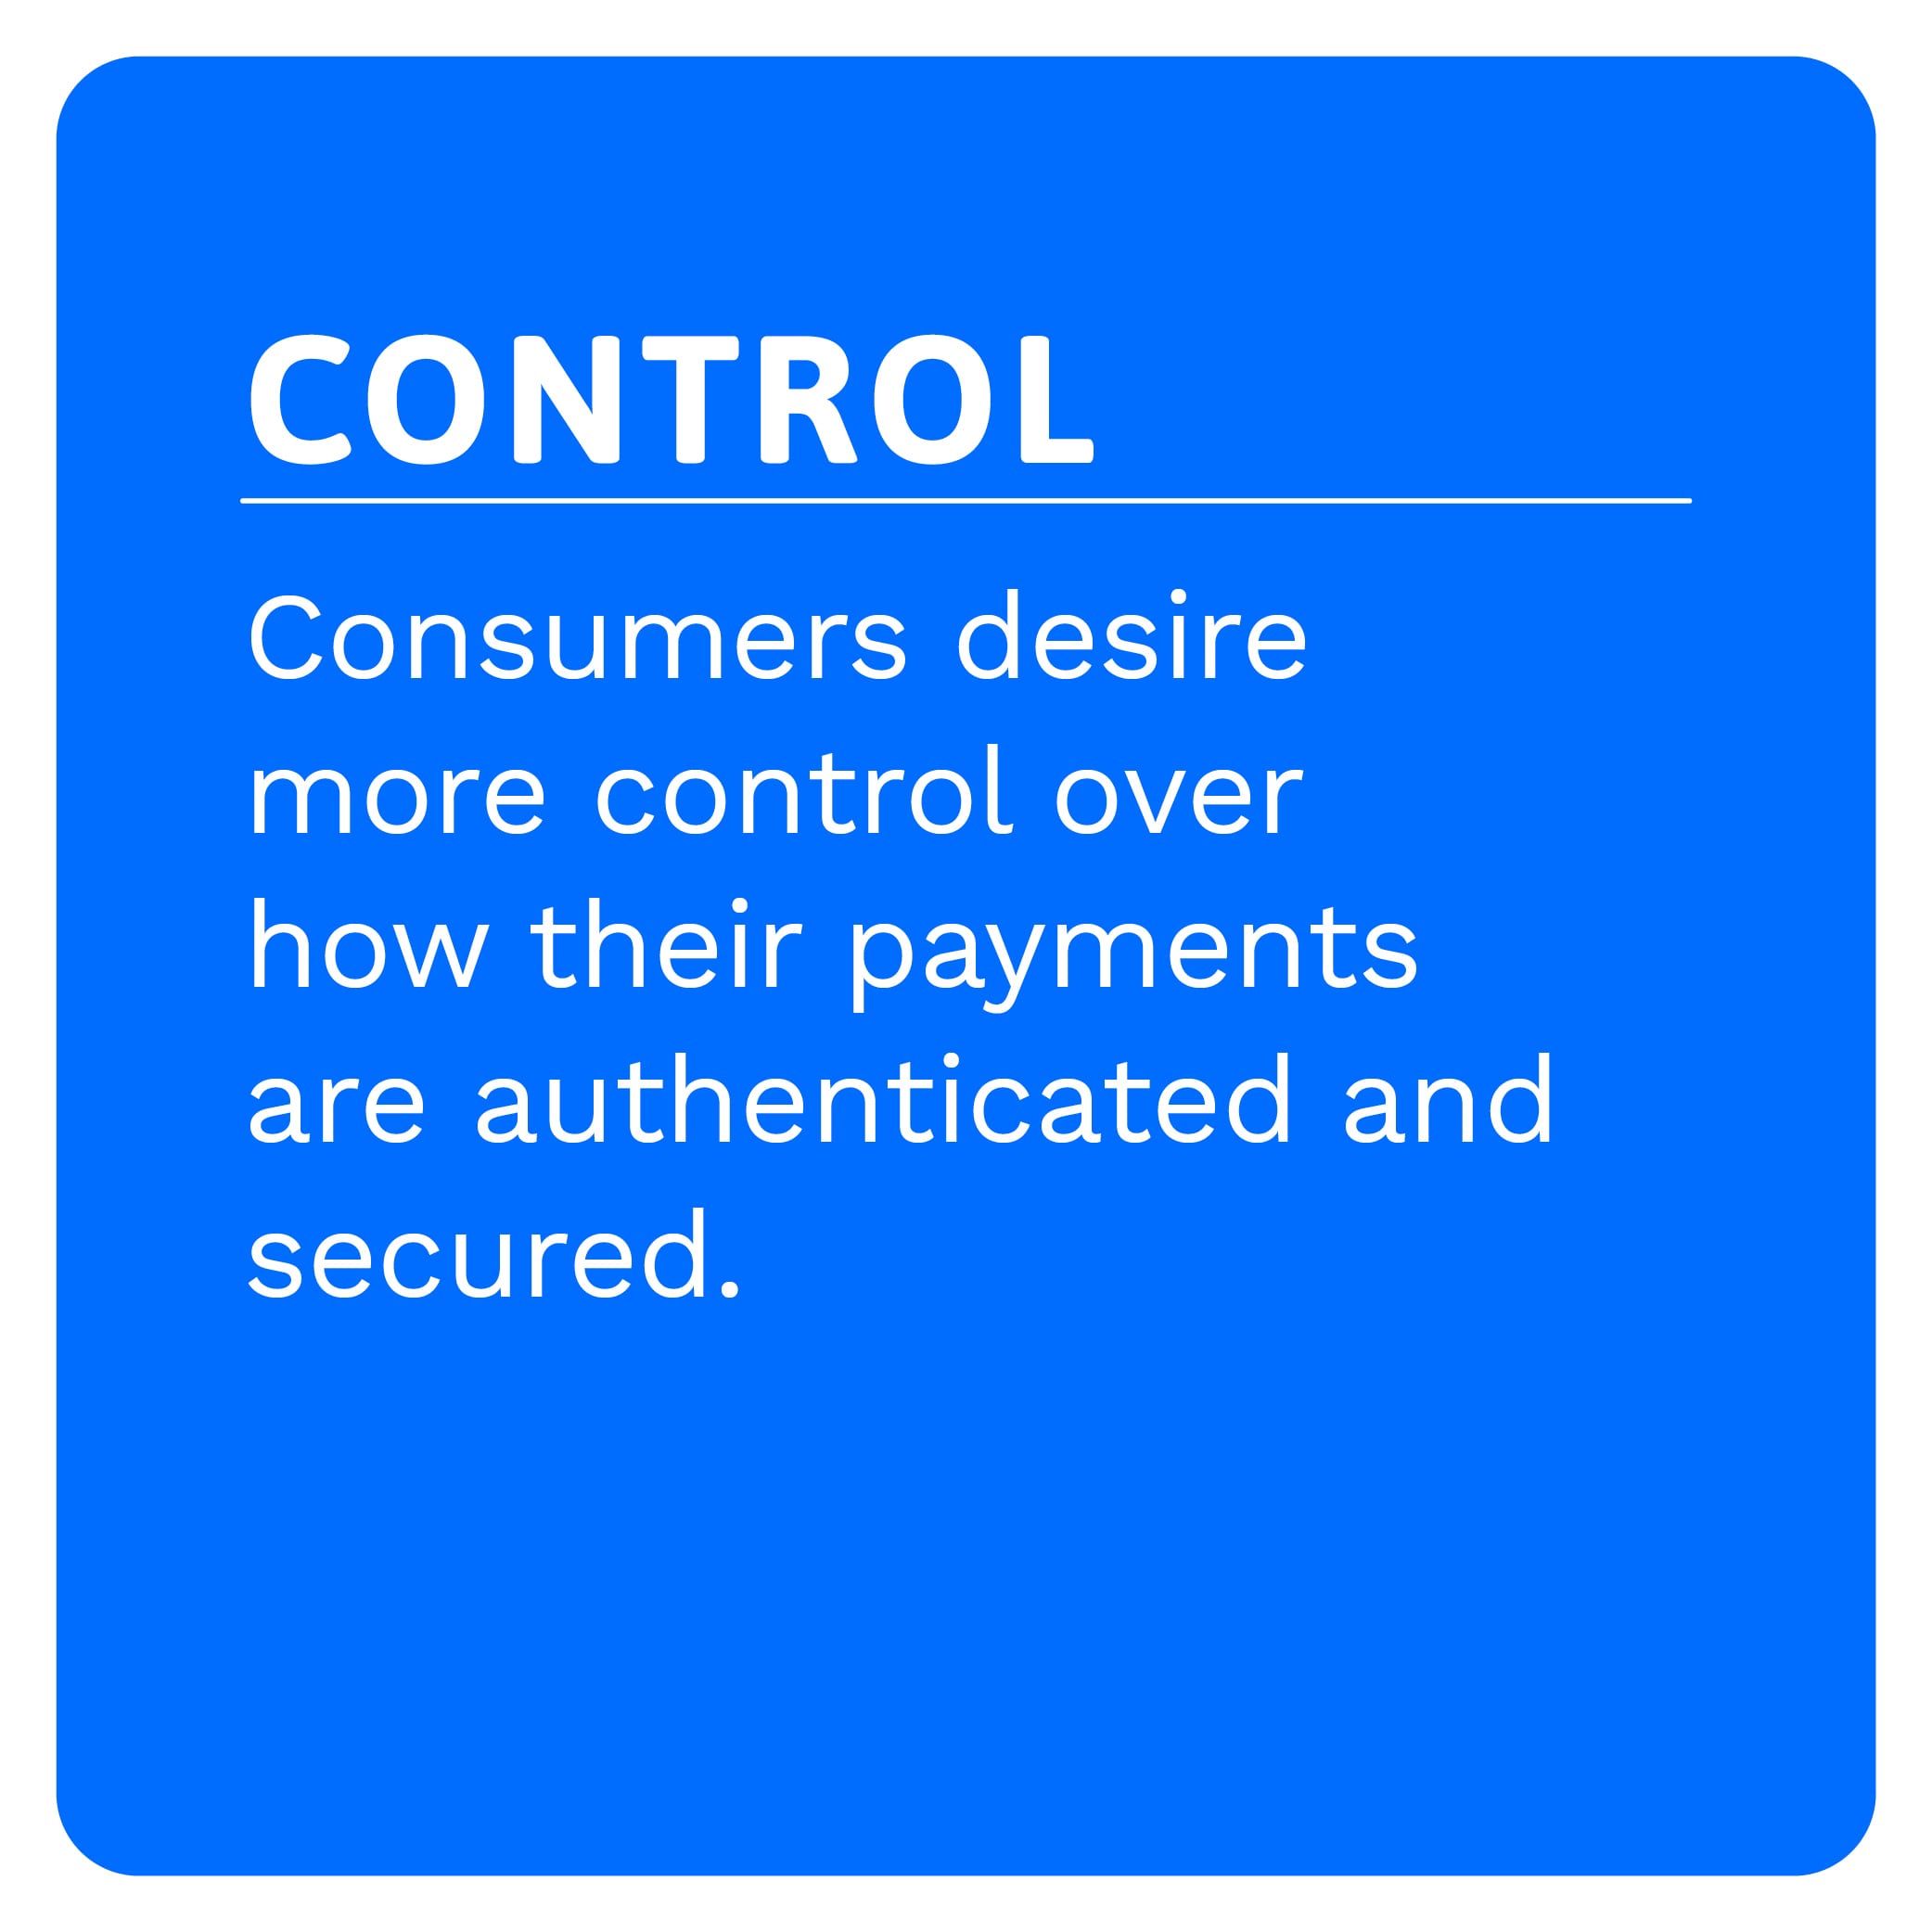 CONTROL: Consumers desire more control over how their payments are authenticated and secured.